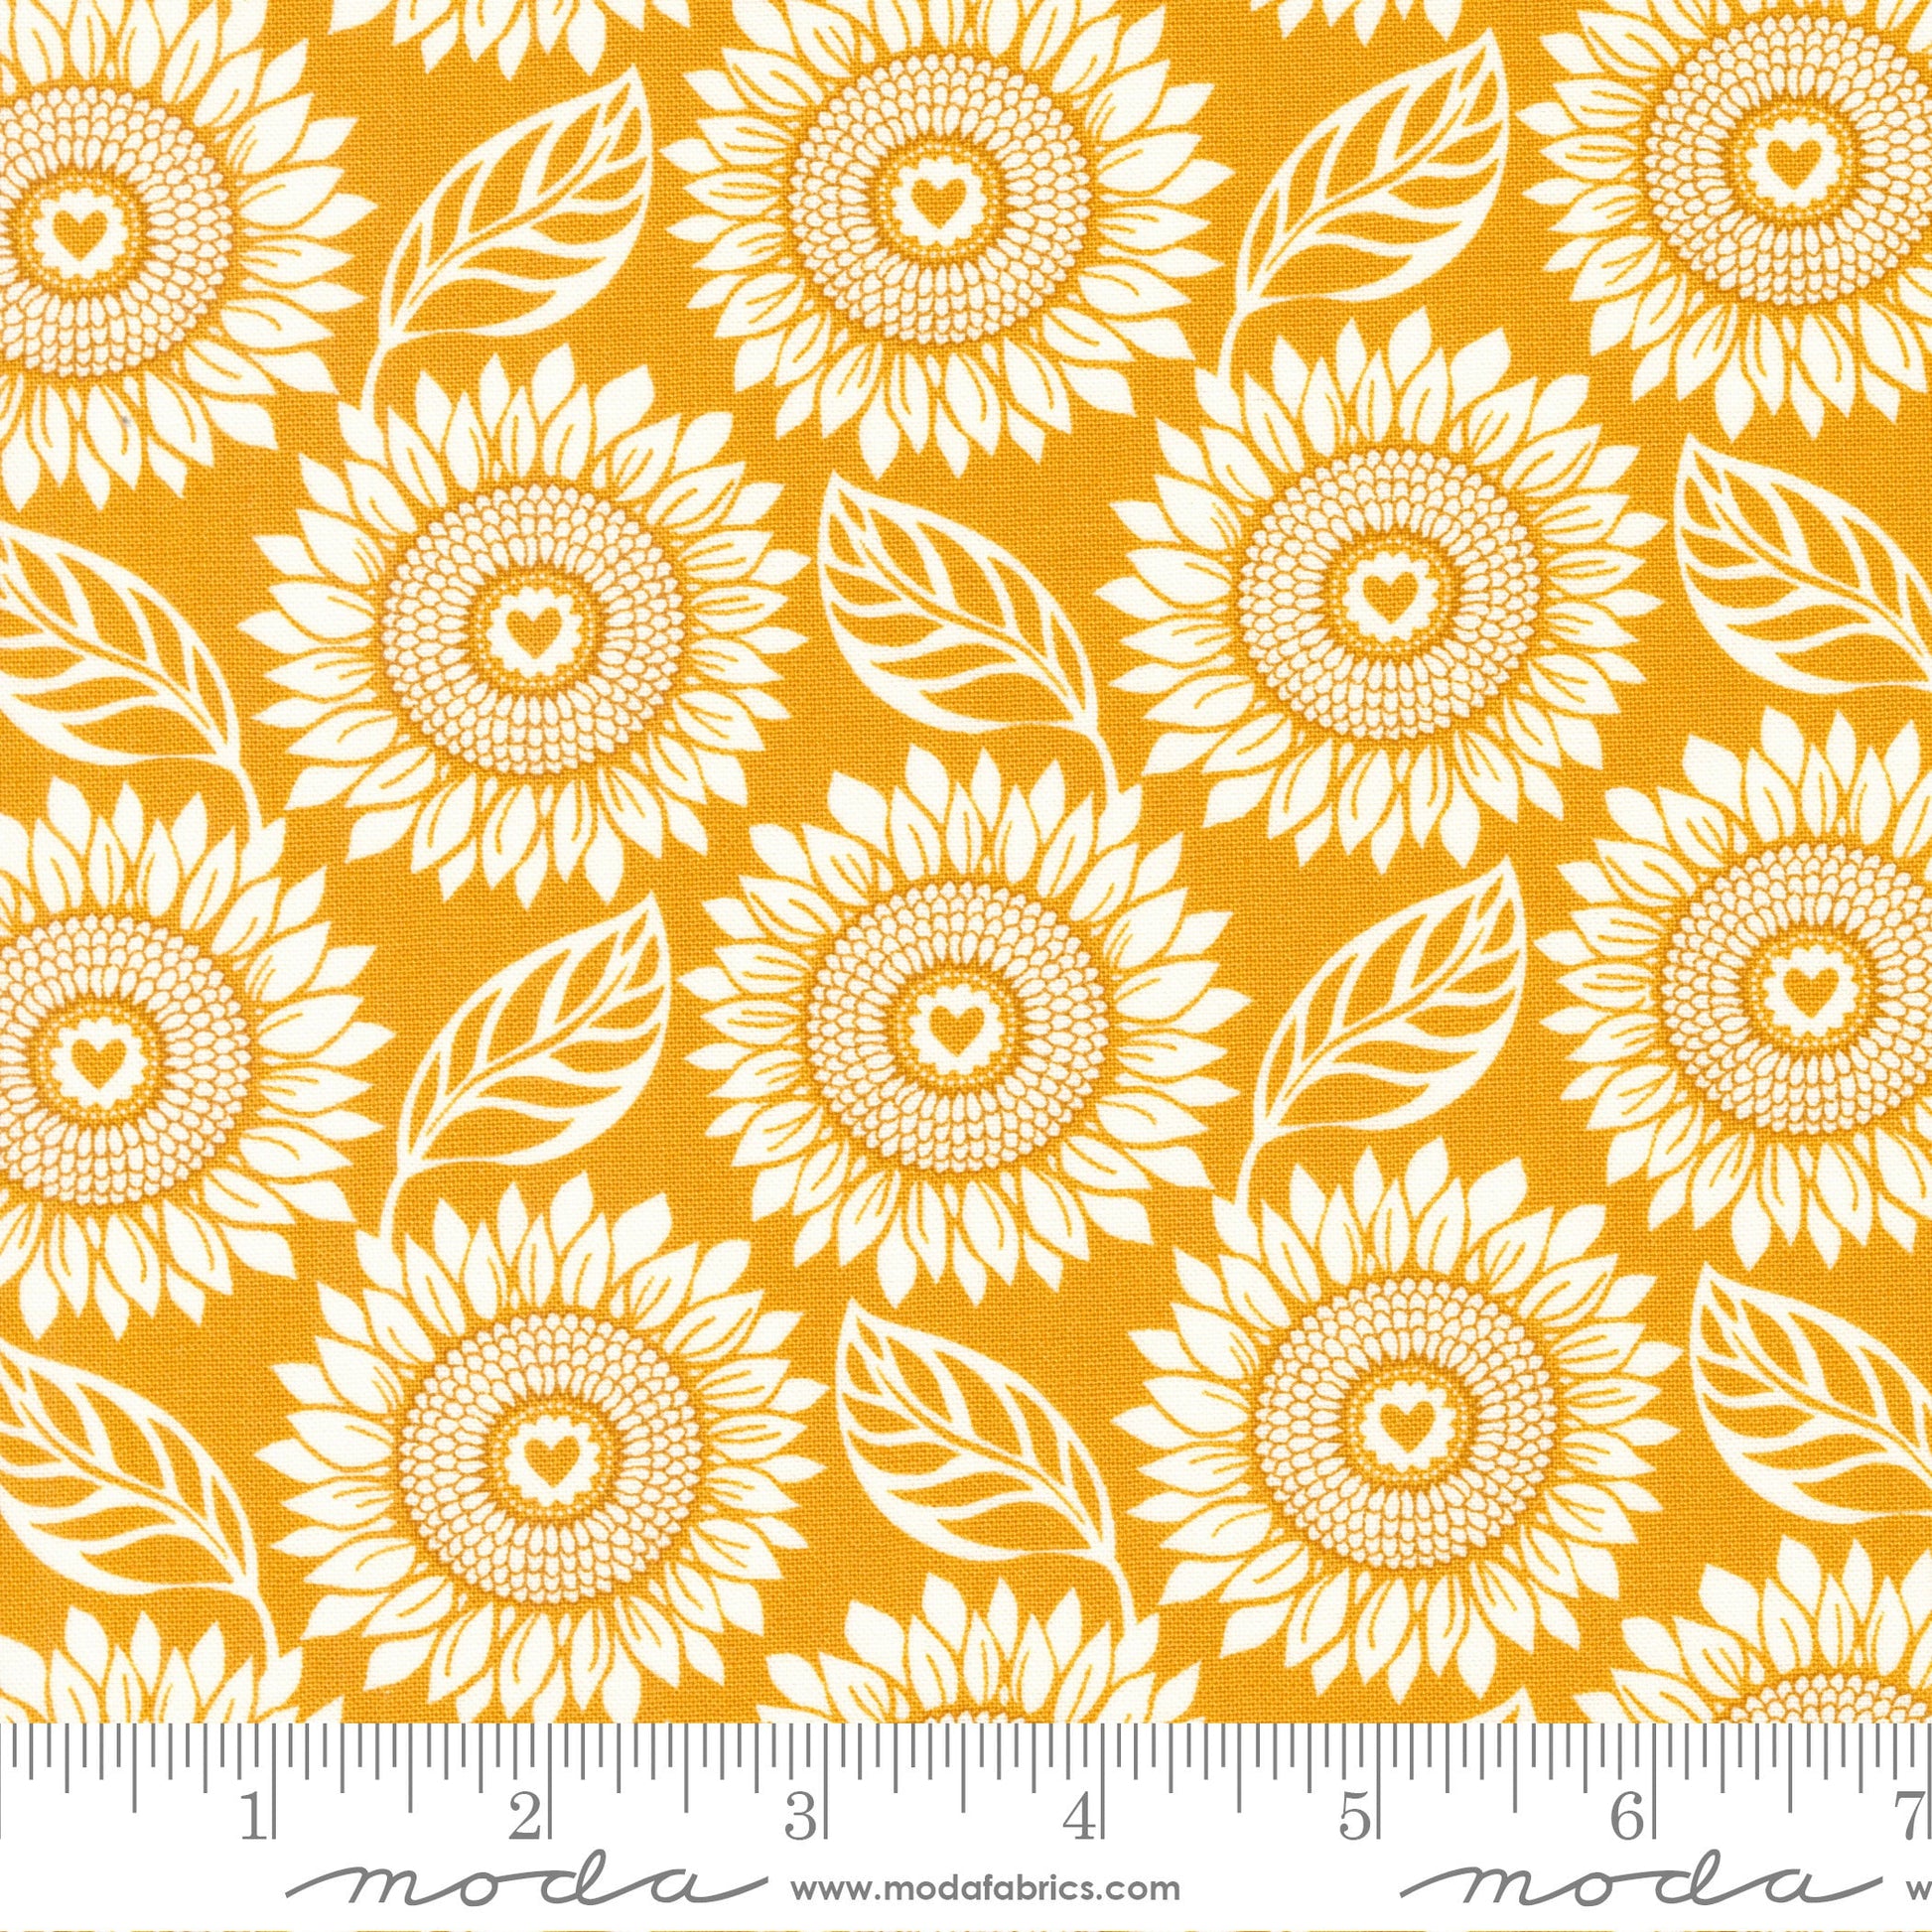 Sunflowers in my Heart Charm Pack - Kate Spain for Moda 27320PP, Sunflower Themed Floral Charm Pack, Modern Sunflower Fabric Precuts